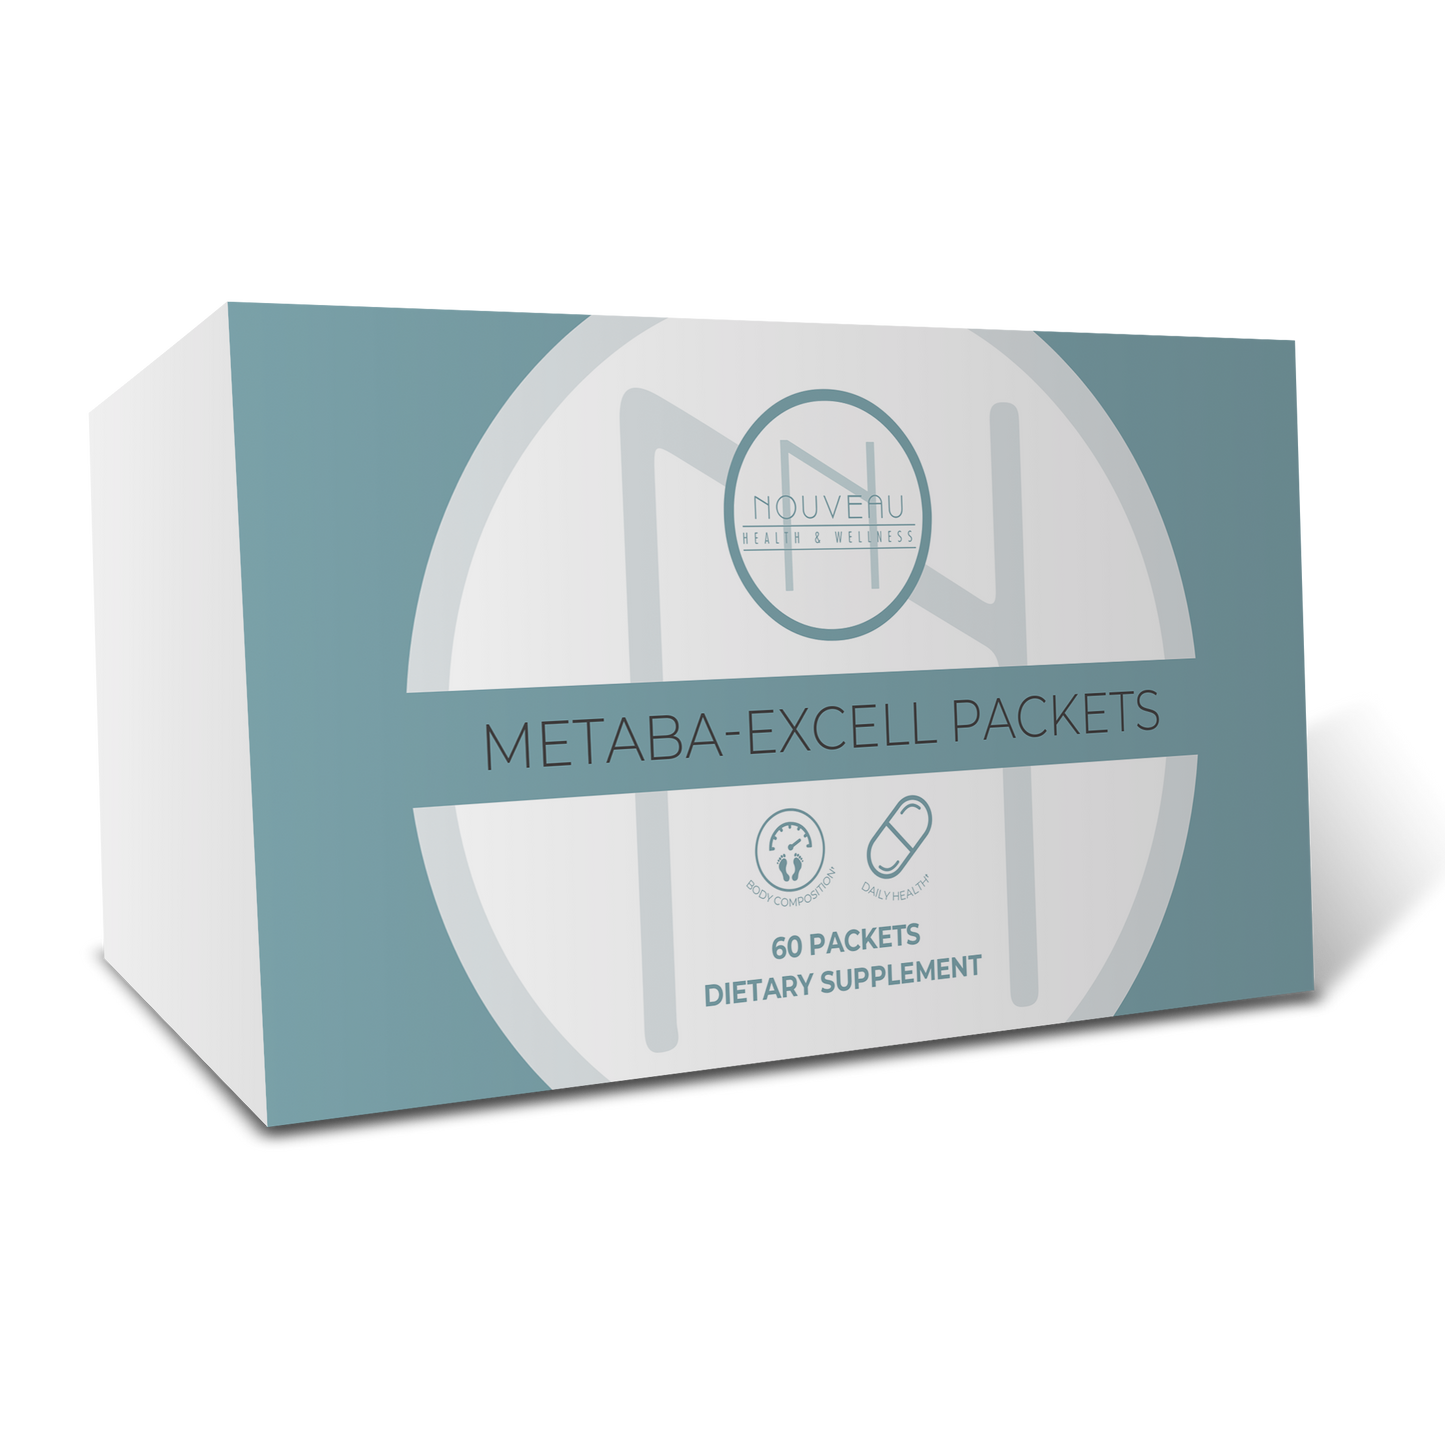 Metaba-Excell Packs